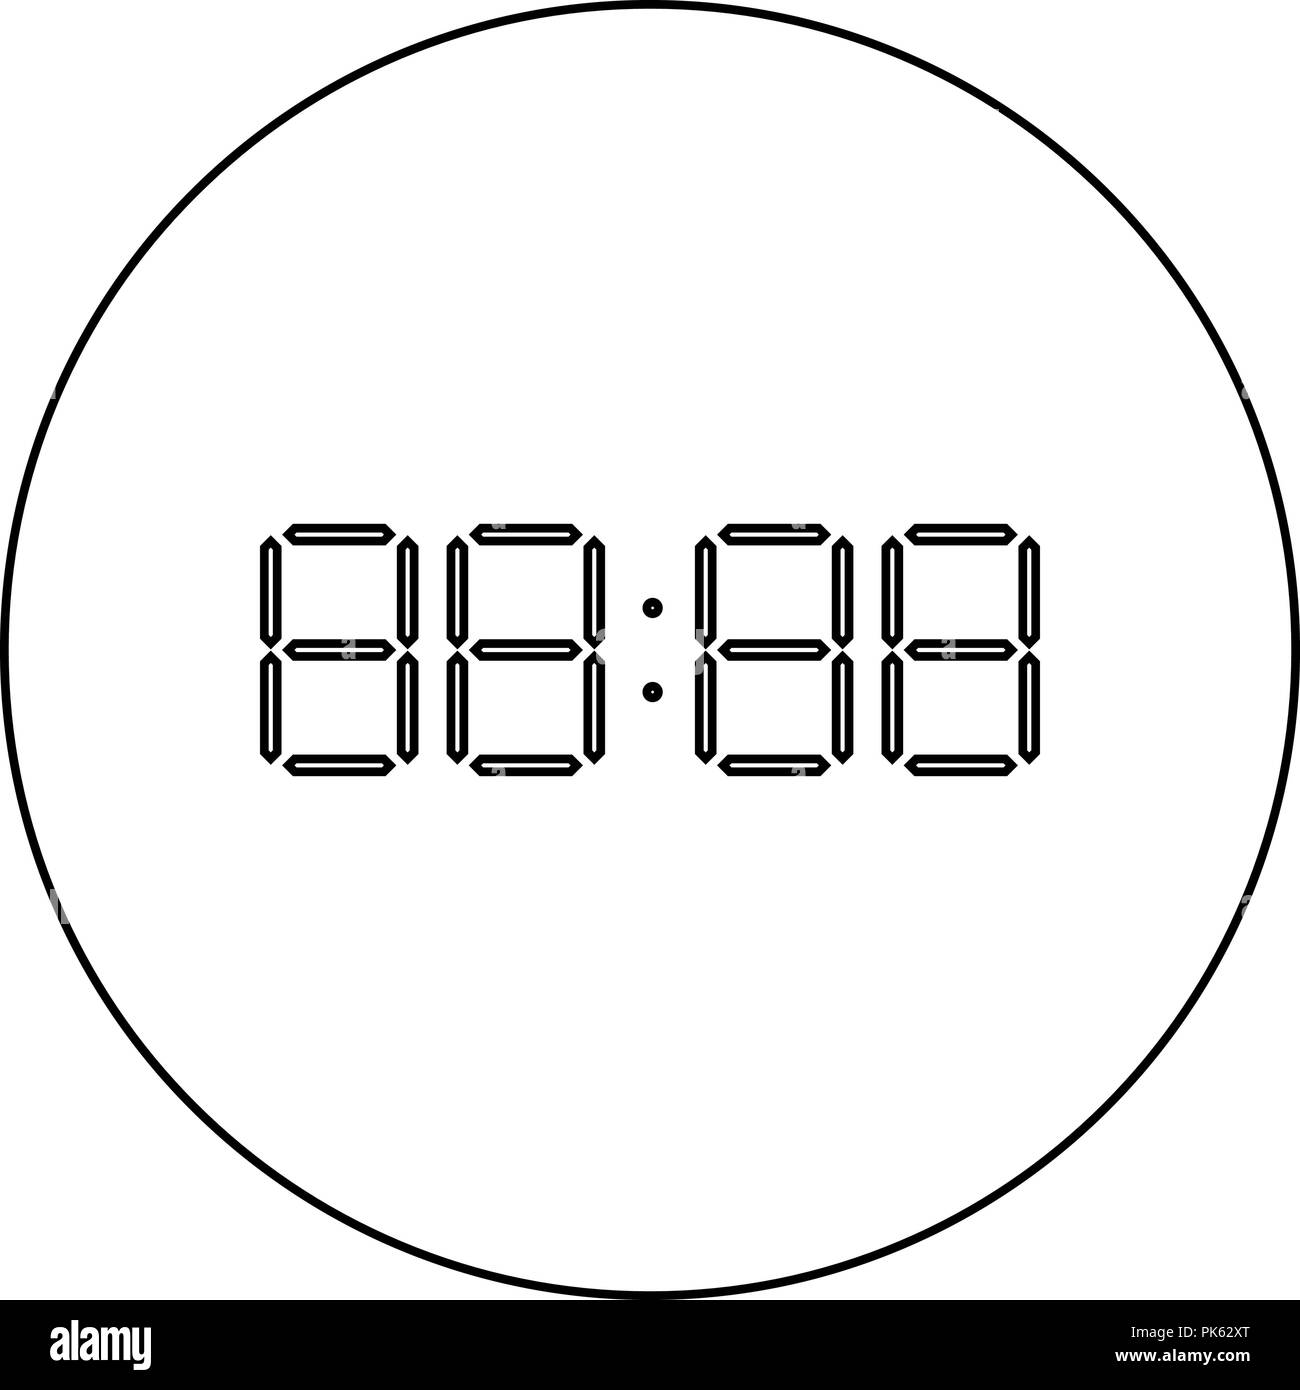 Digital clock face icon black color in round circle outline vector I Stock Vector